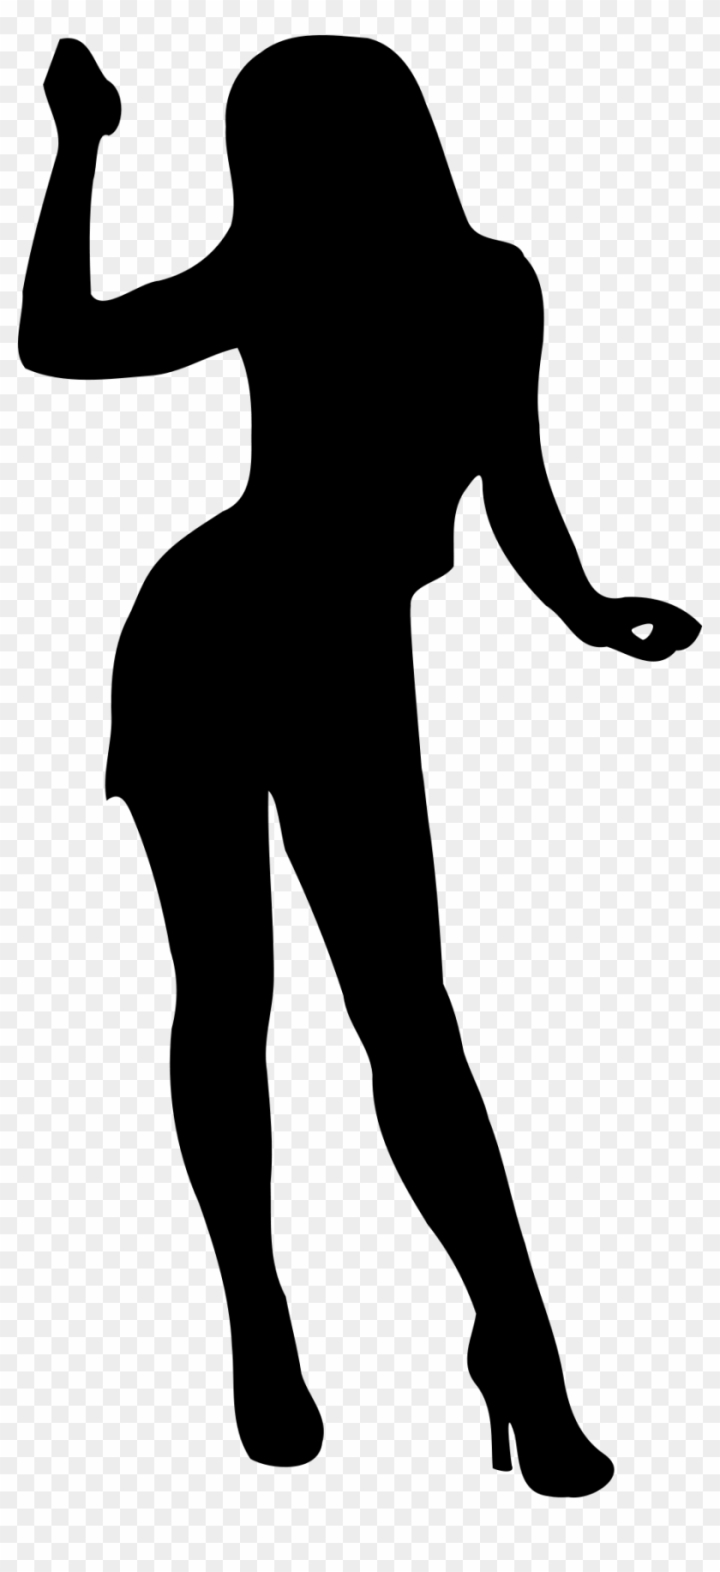 Body Silhouette Outline drawing free image download